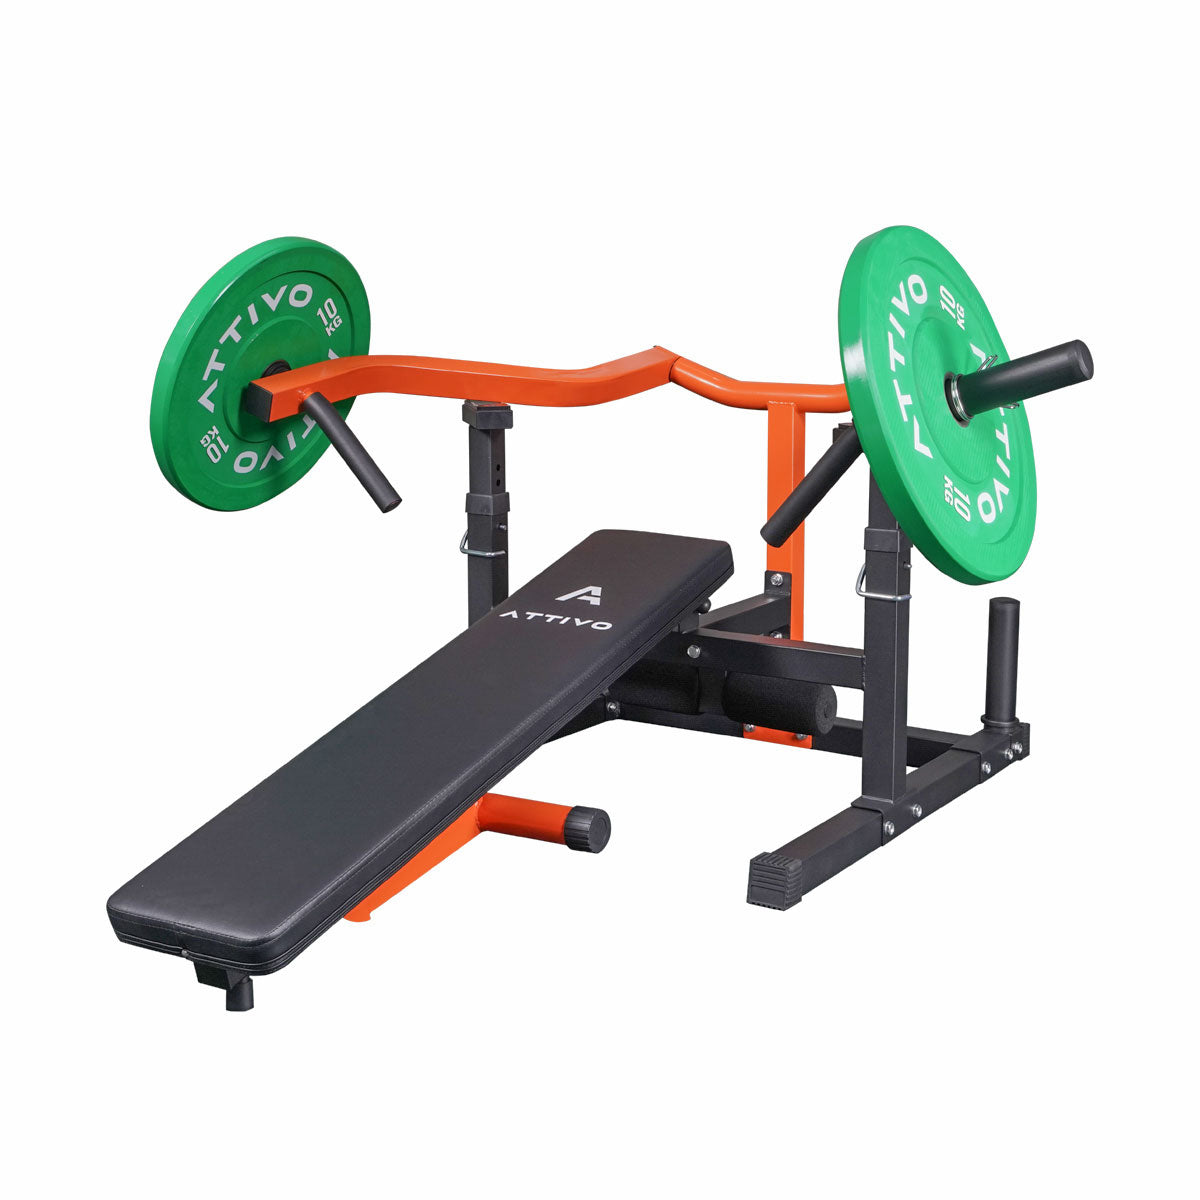 ATTIVO Chest Press Bench, Adjustable Flat Incline Bench Press with Independent Converging Arms, Chest Press Machine